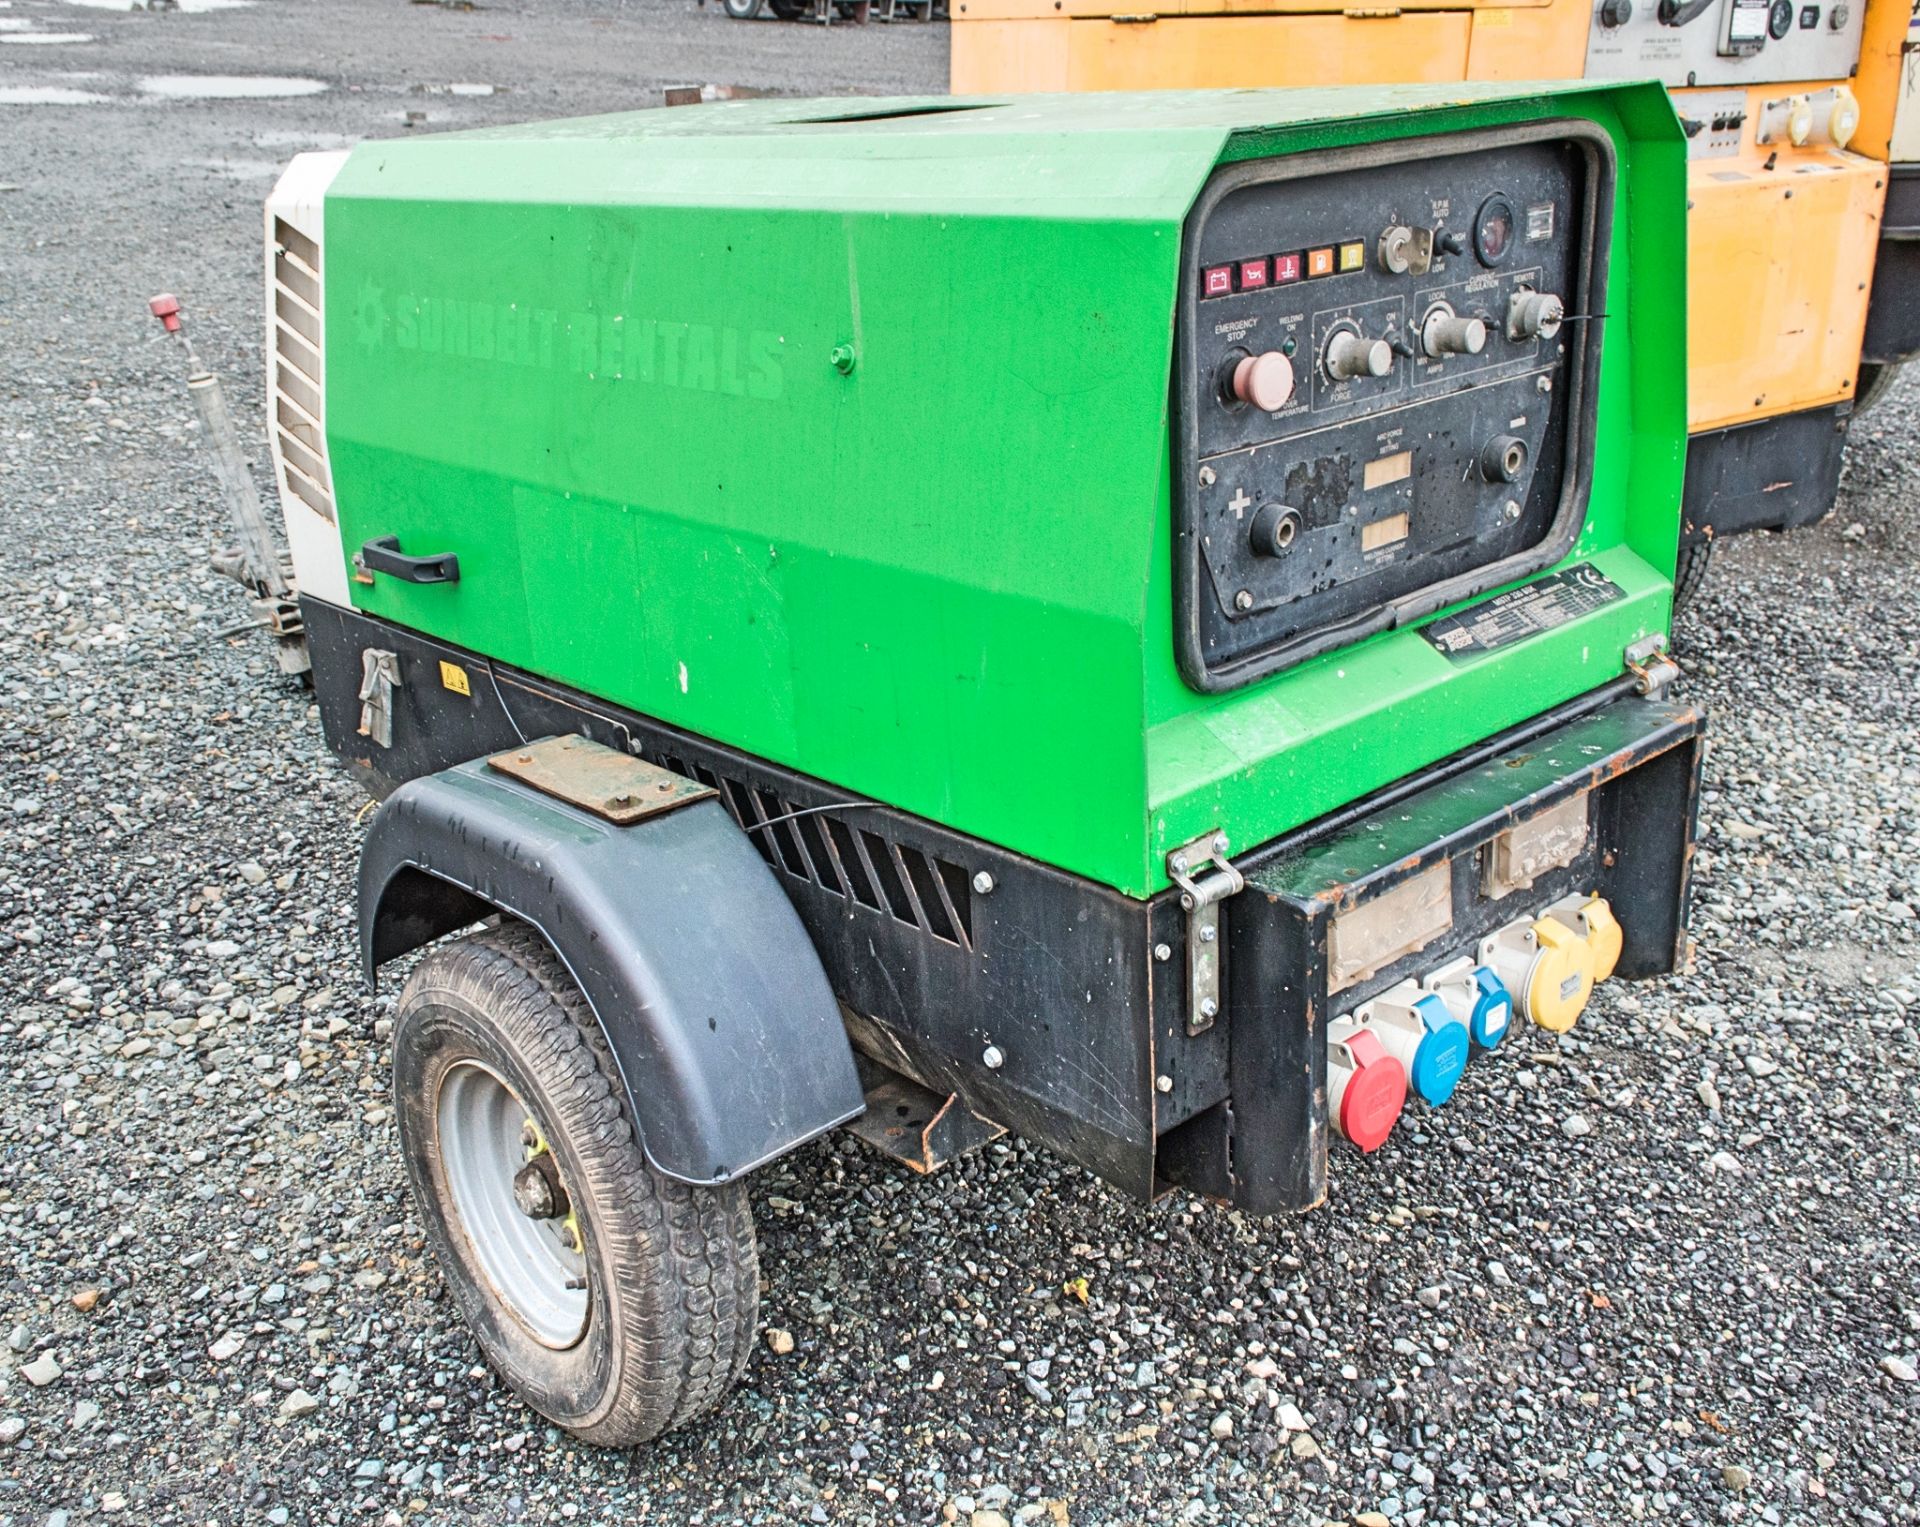 Tekno MSTP 330 SSK 330 Amp fast tow diesel driven welder generator  Recorded Hours: 1323 A674511 - Image 2 of 4